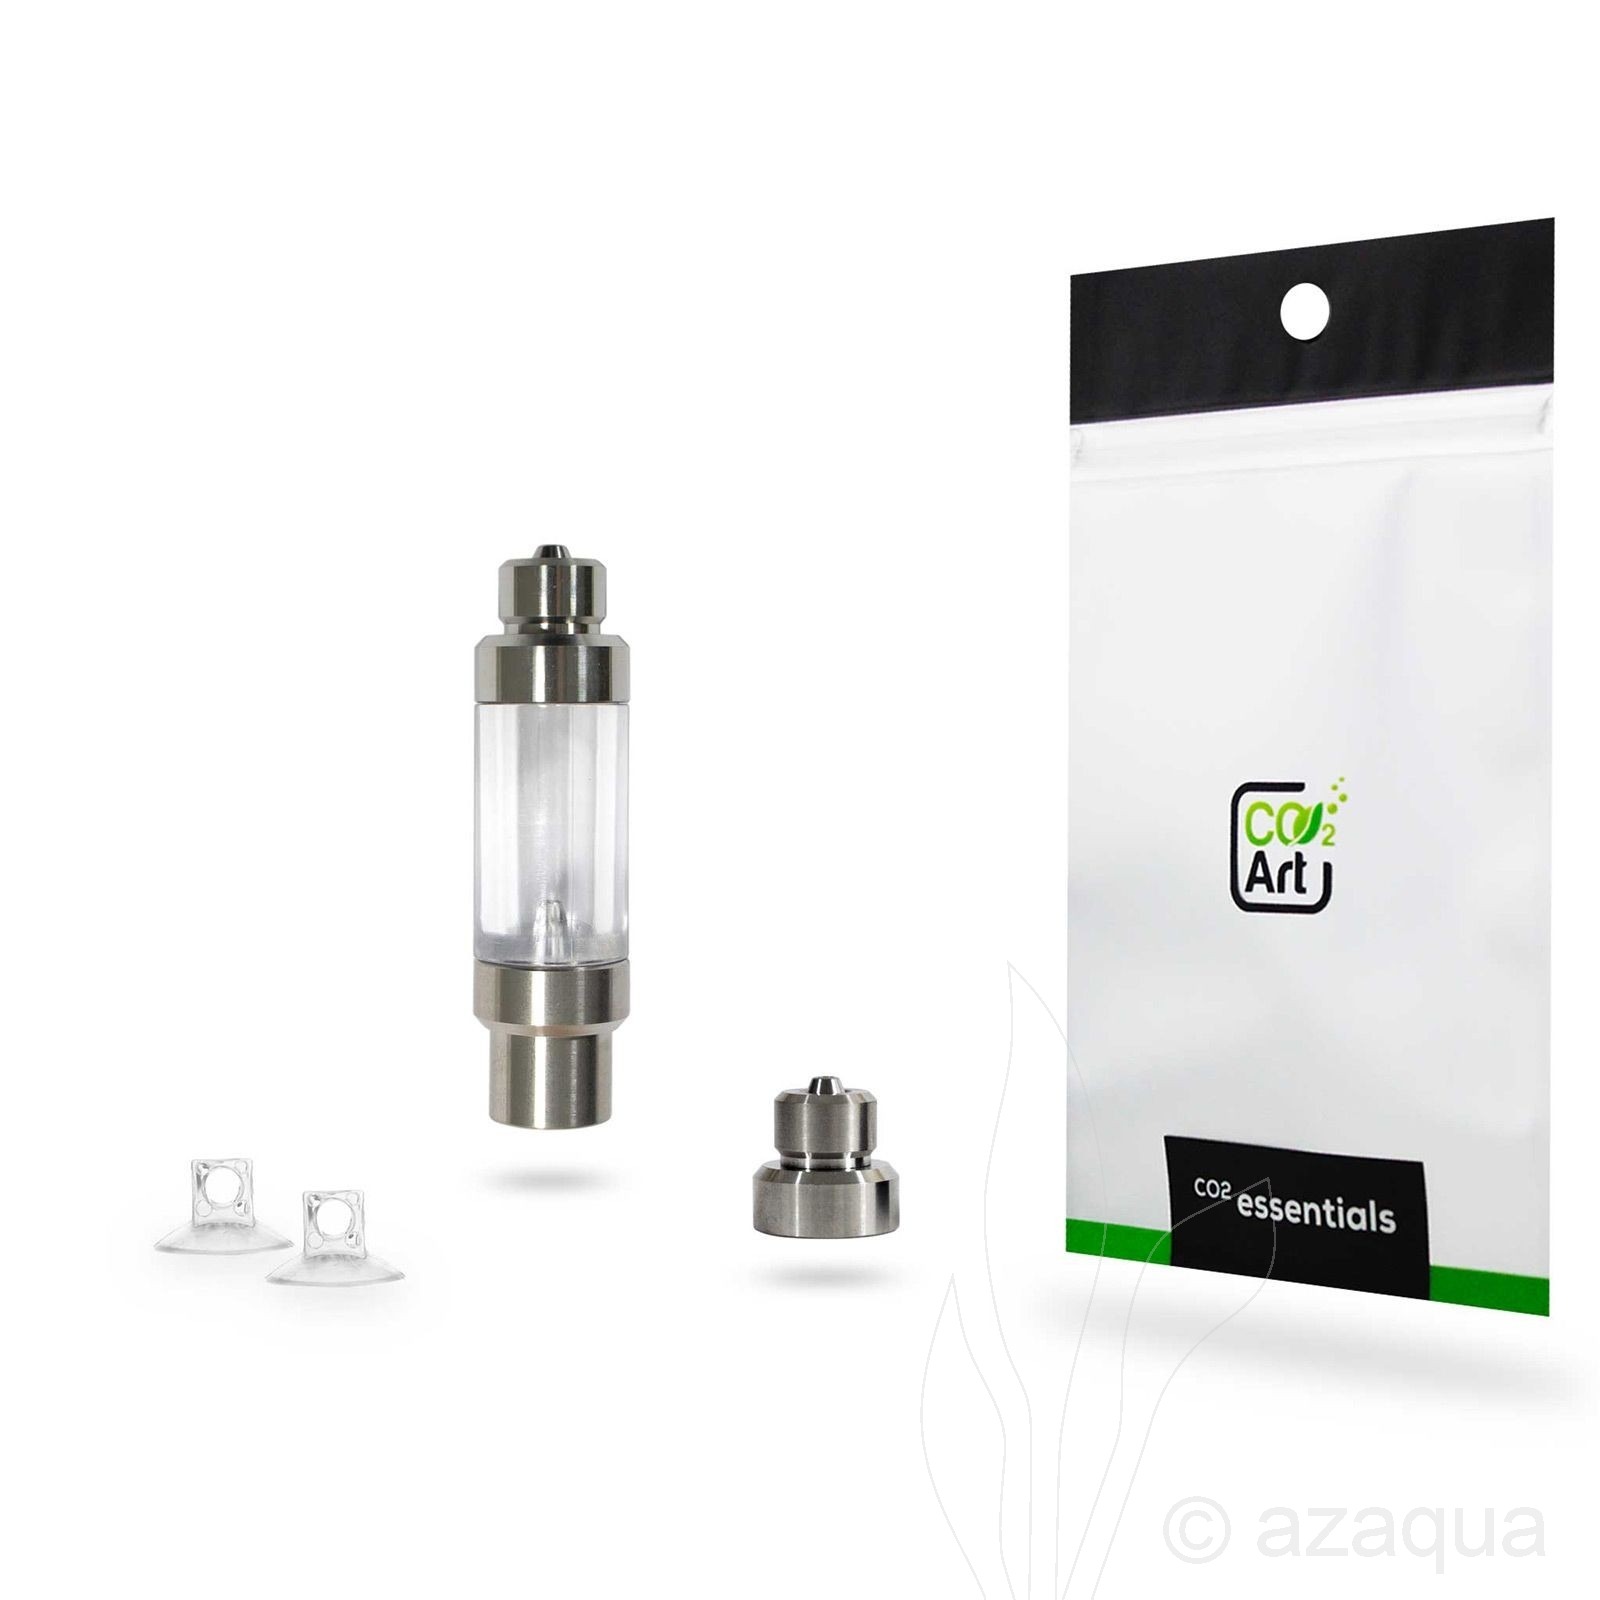 CO2Art Precision Stainless Steel Bubble Counter Kit